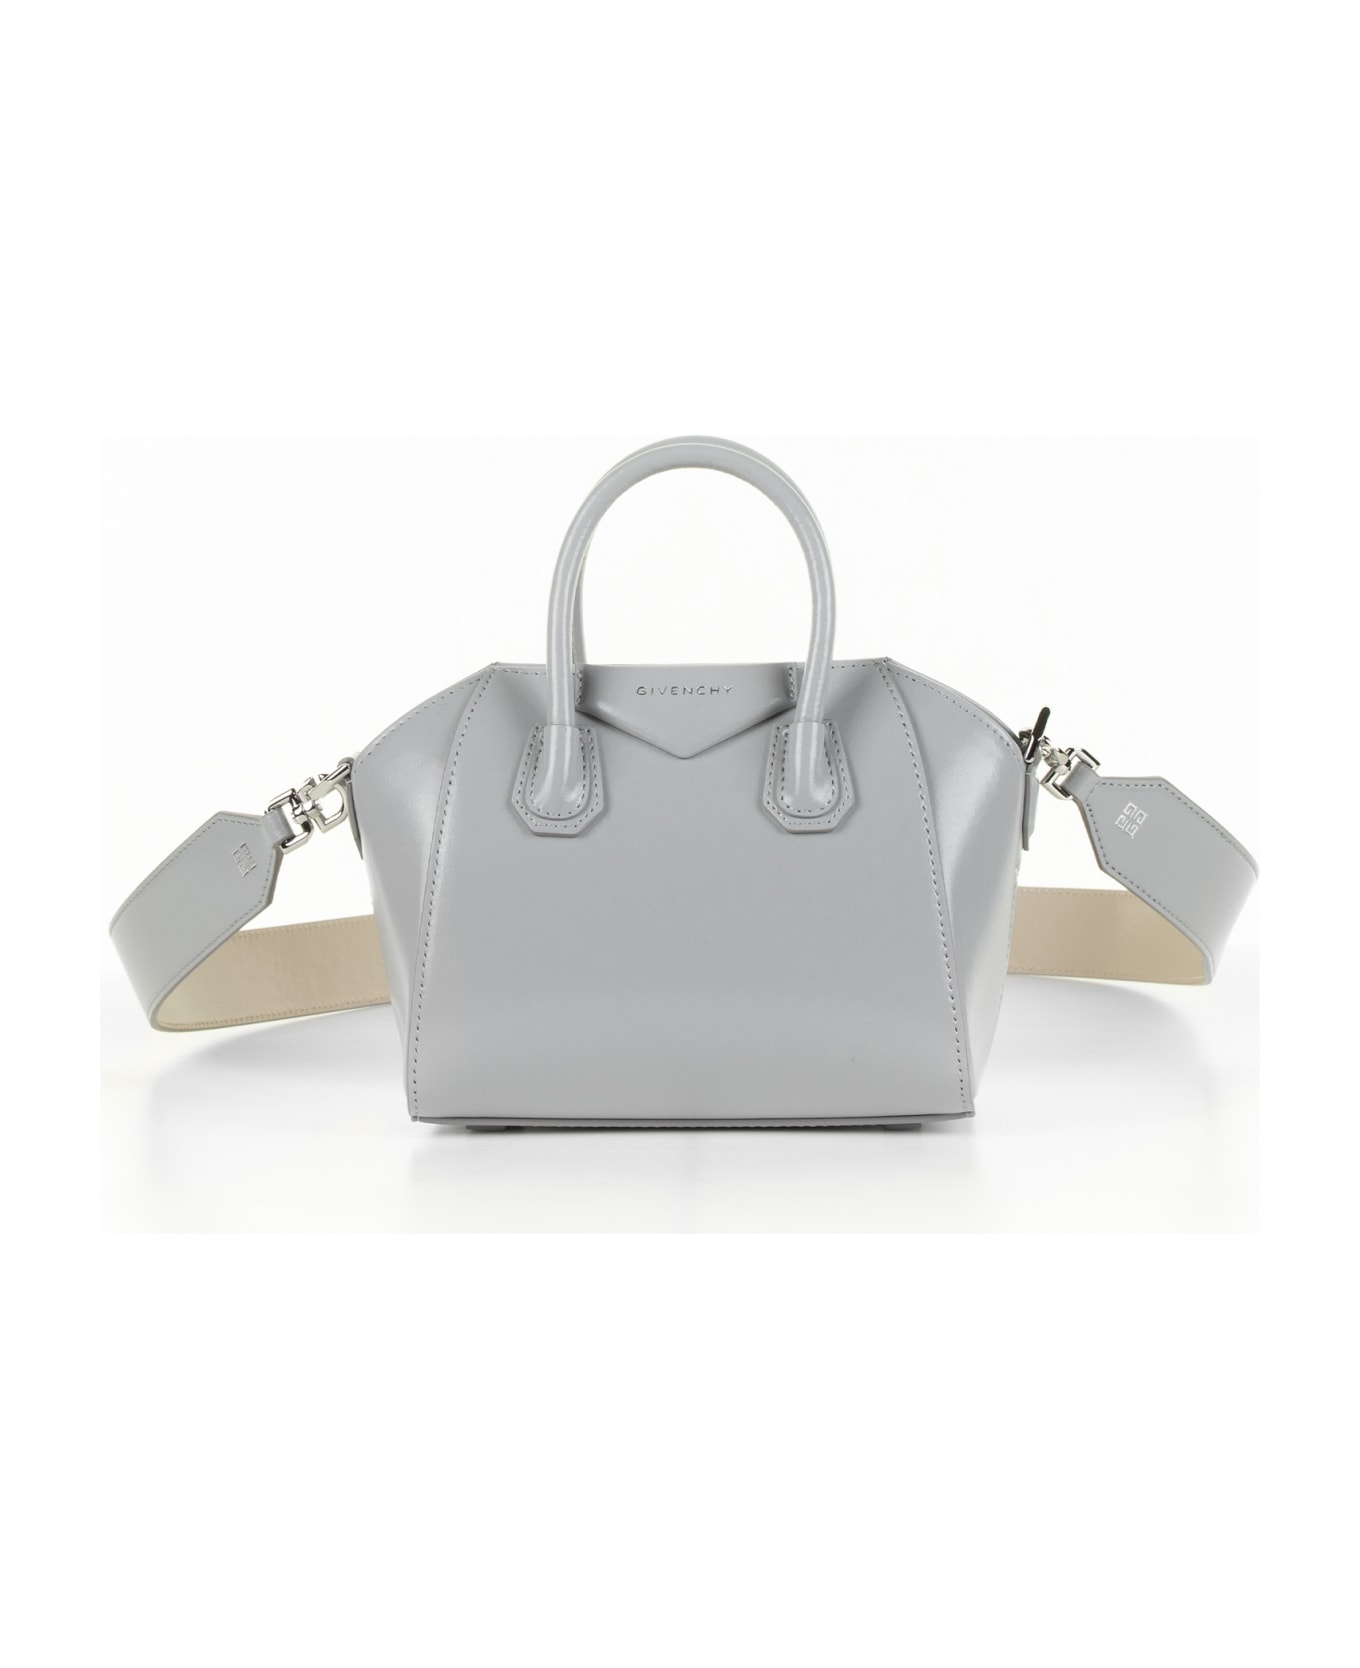 Givenchy Antigona Top Handle Bag - Carry the handy ® Lola Novelty Crossbody Bag with all your essentials inside it